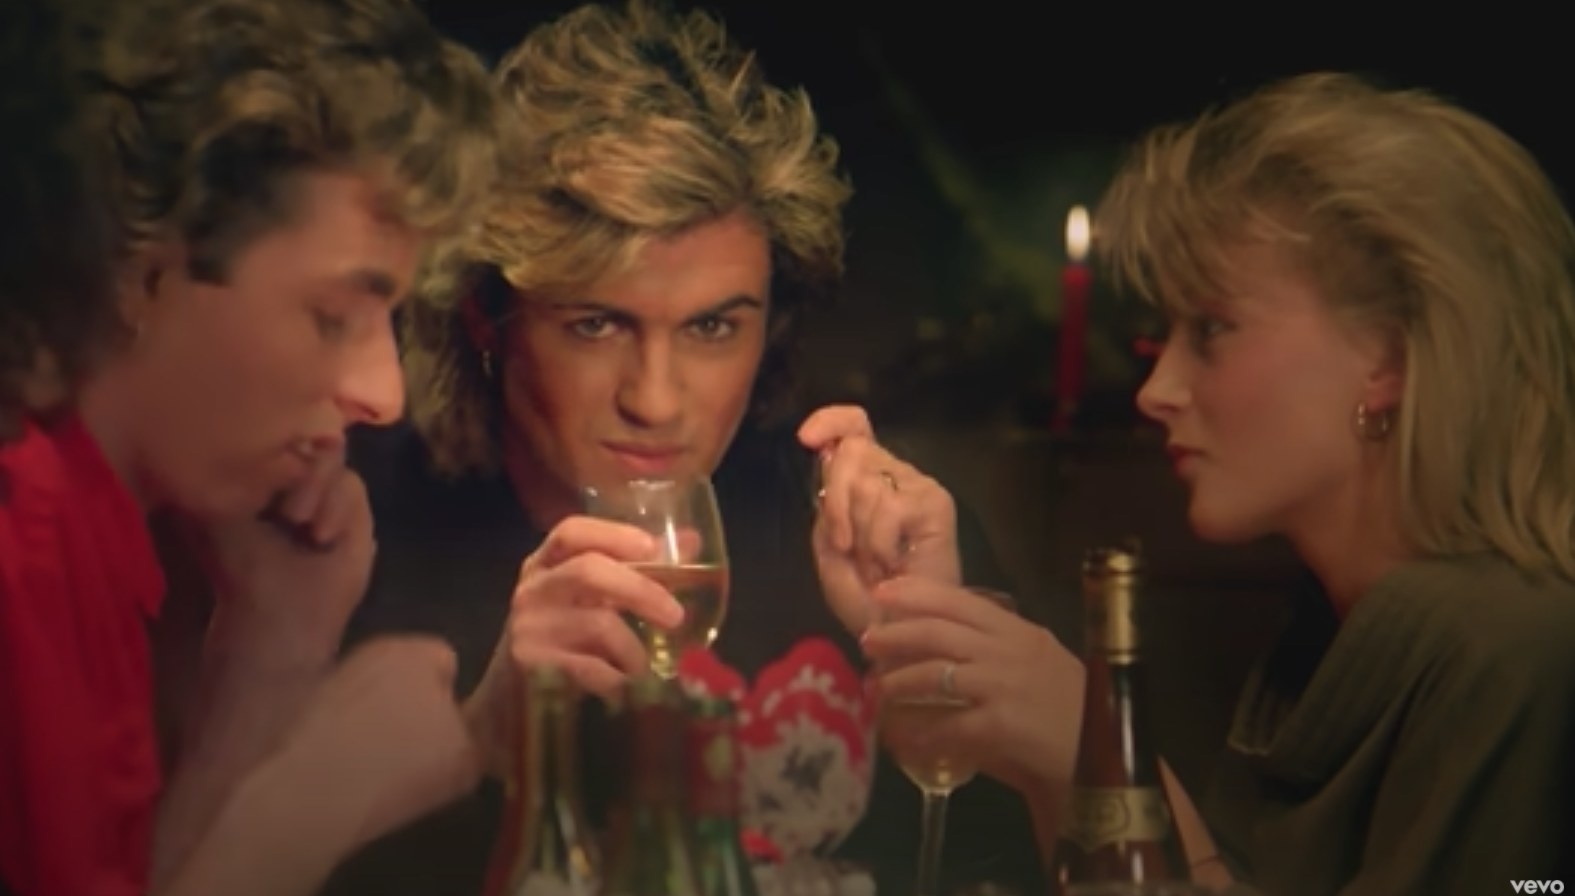 George Michael stares intently at someone over a wine glass; in front of him a man and a woman carry on a conversation